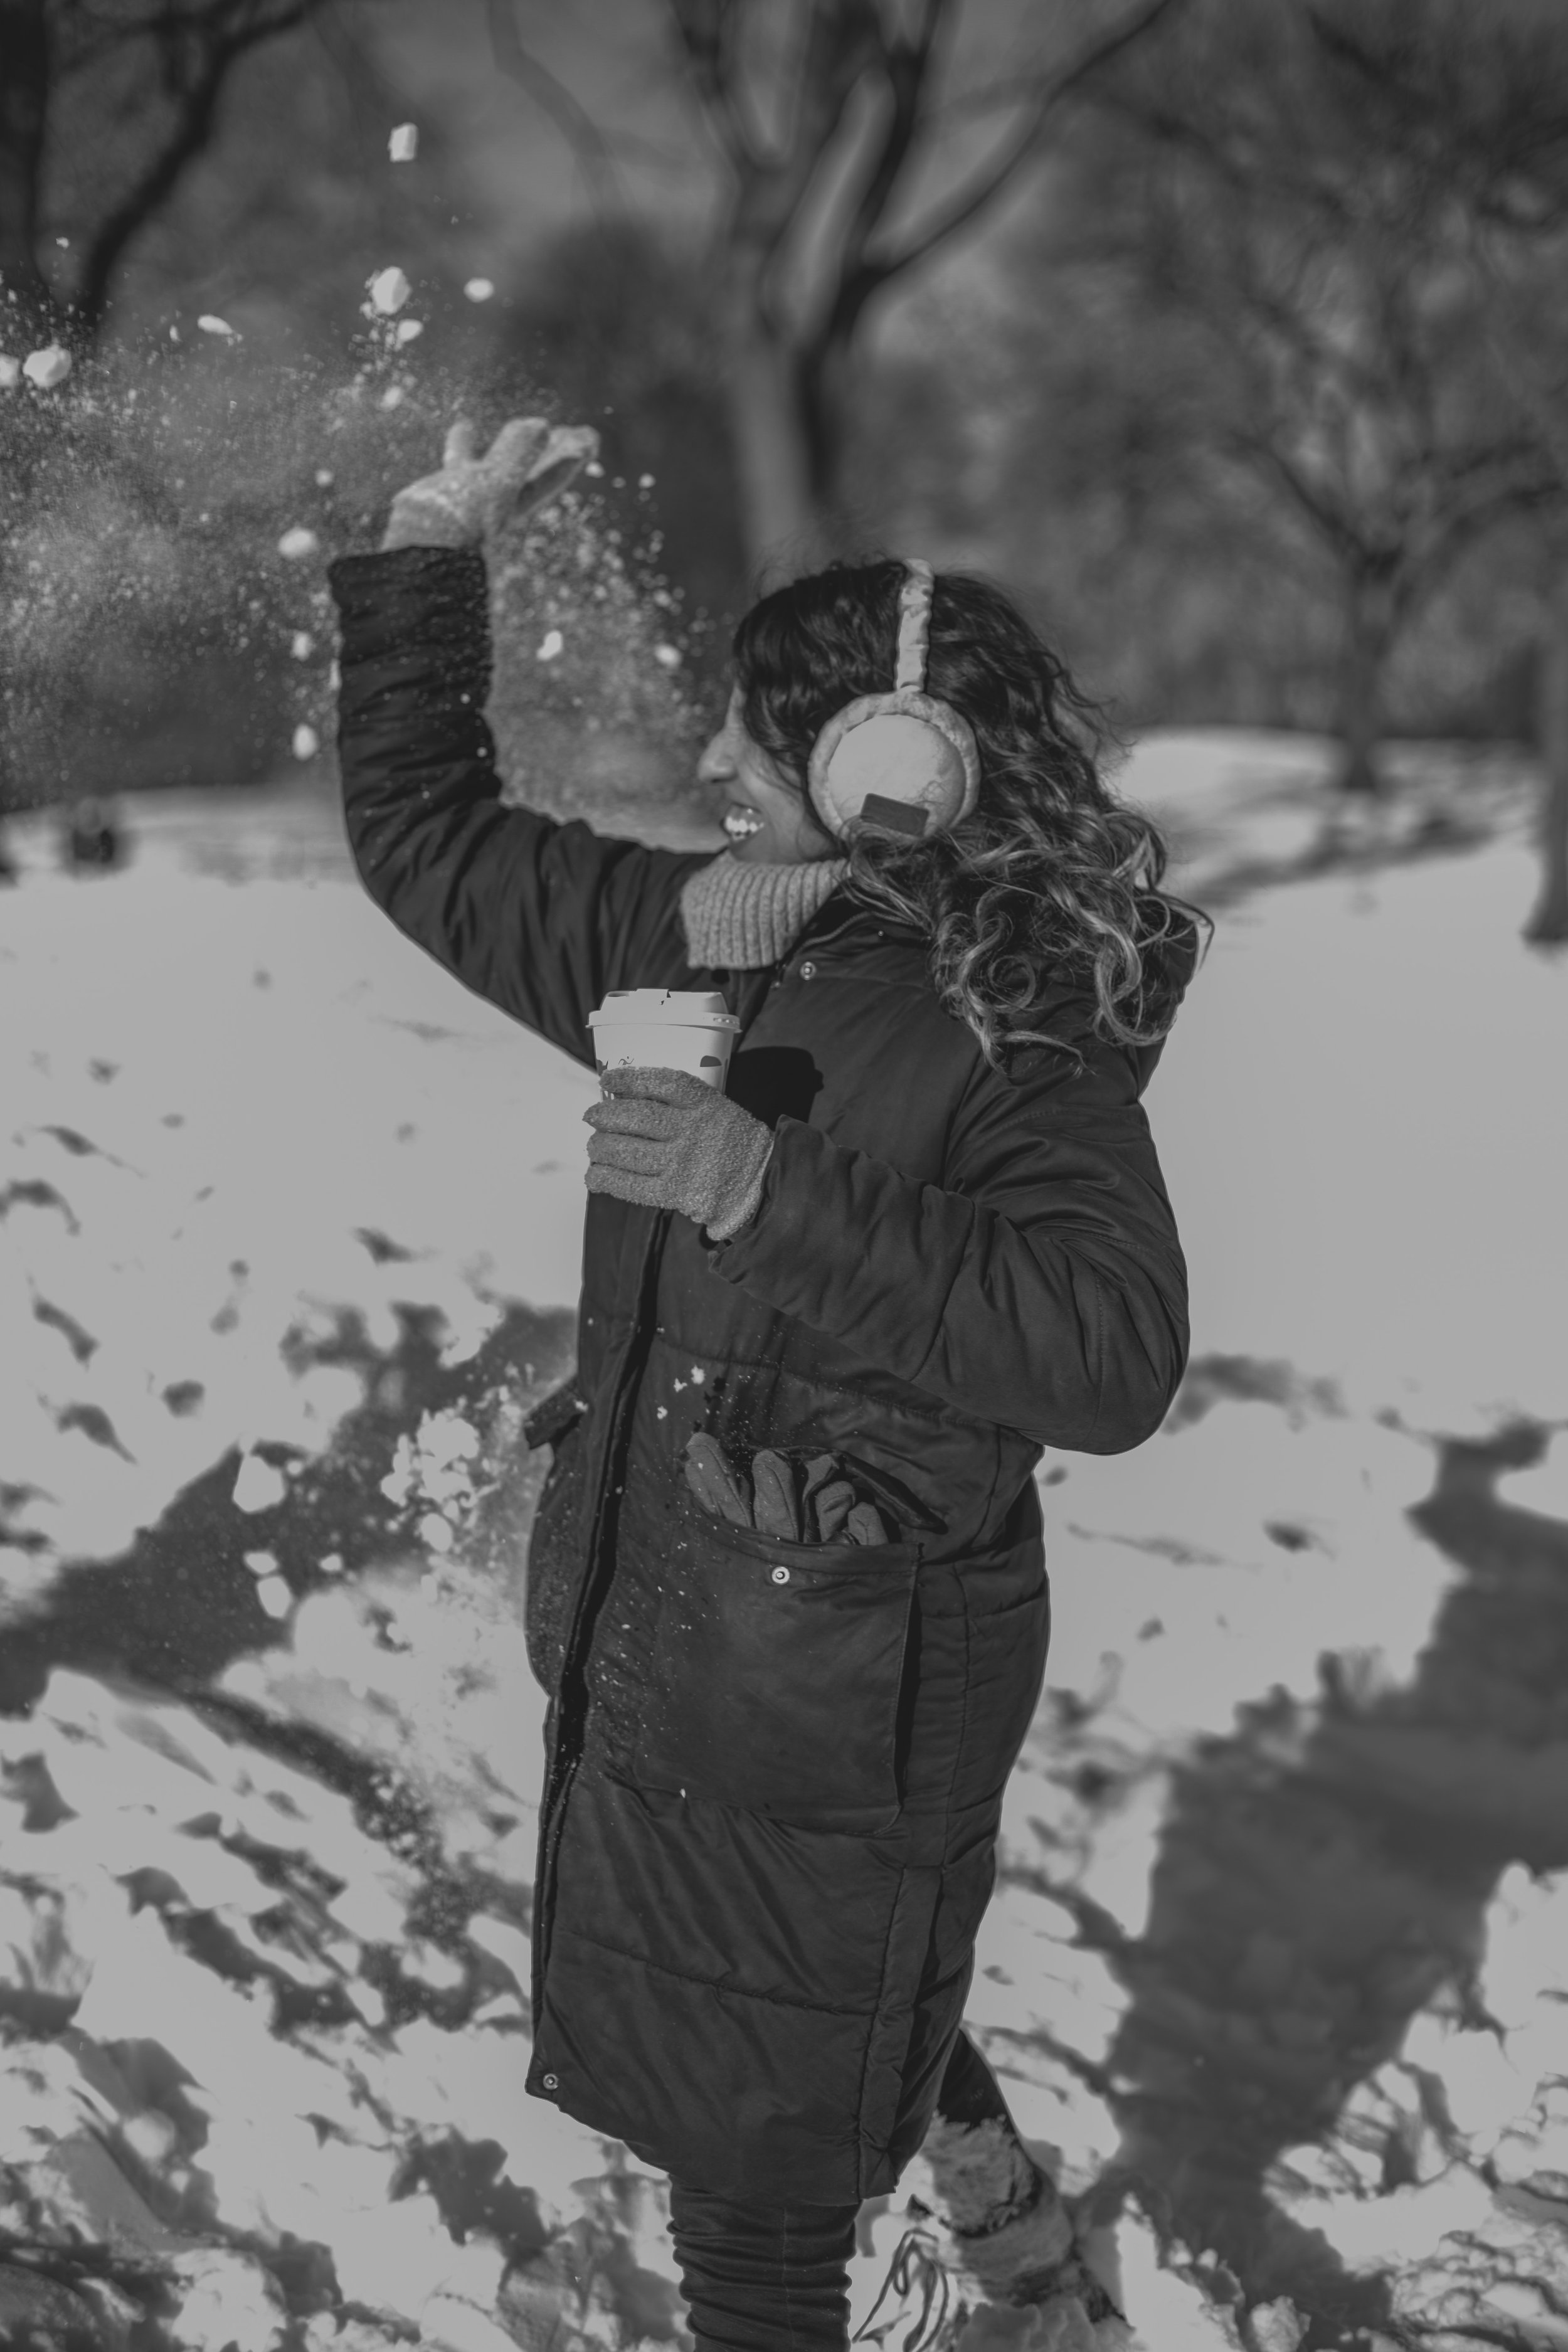 Black and white throwing snow in central park